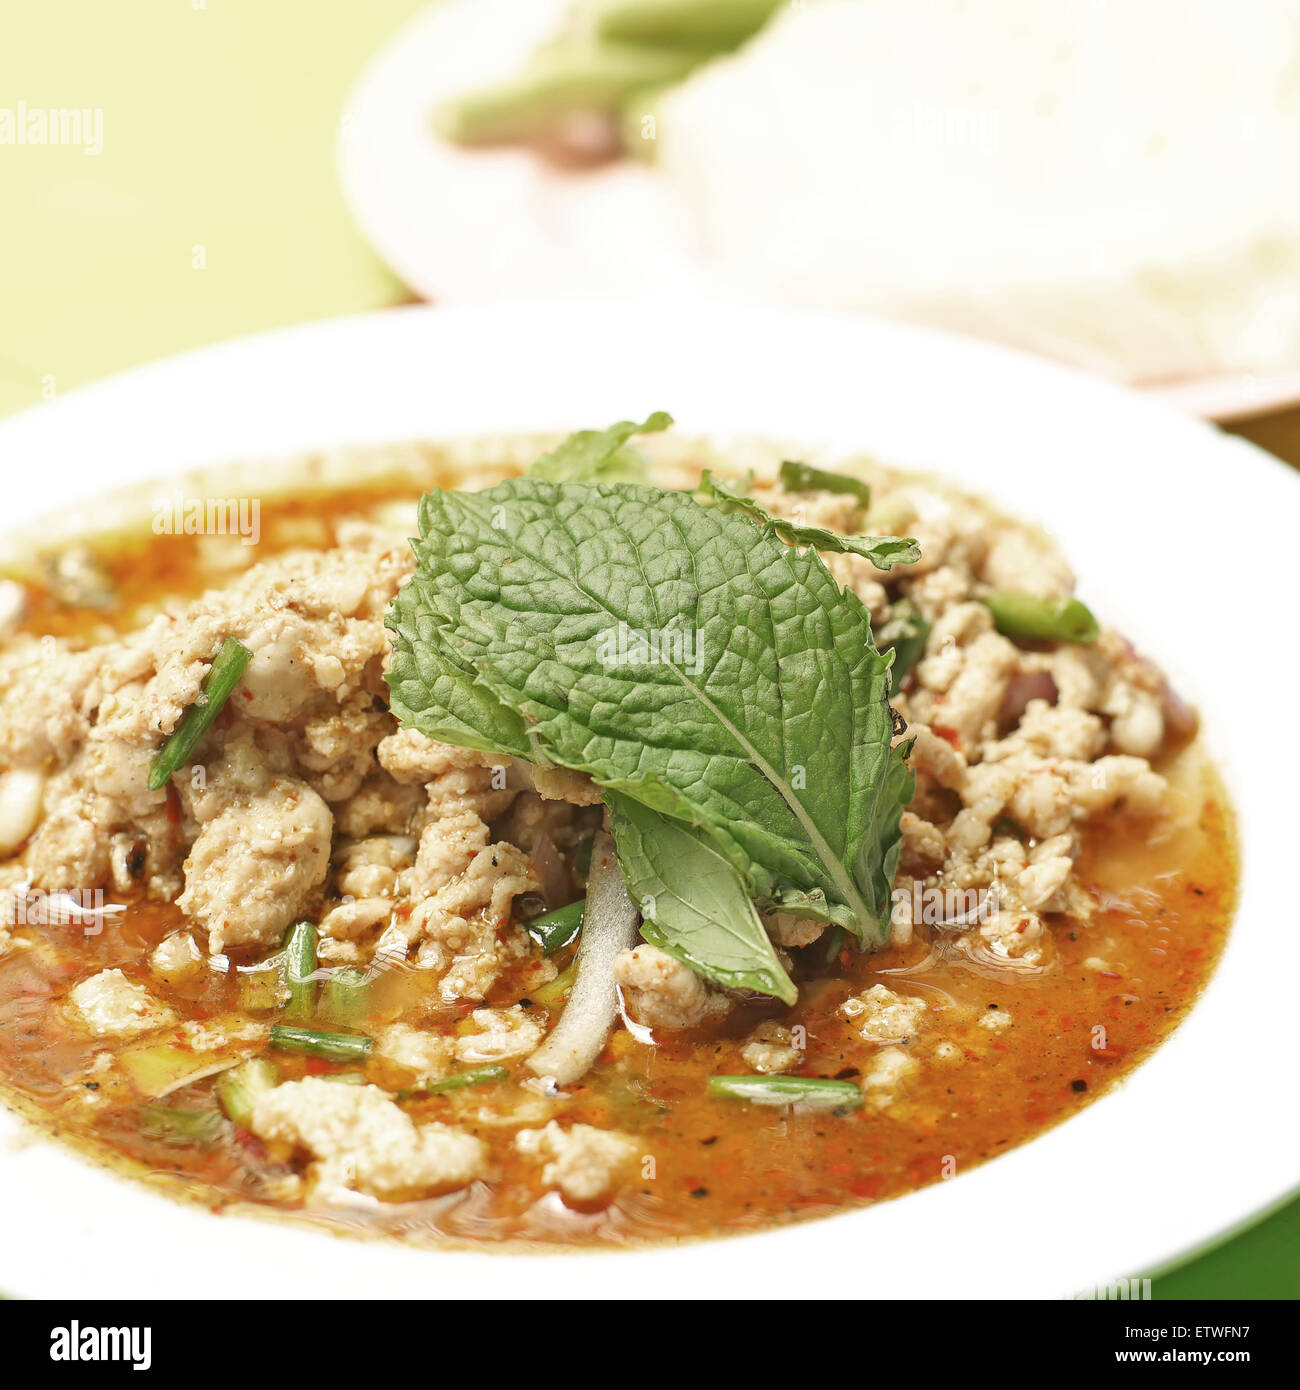 famous thai food, minced meat spicy salad Stock Photo